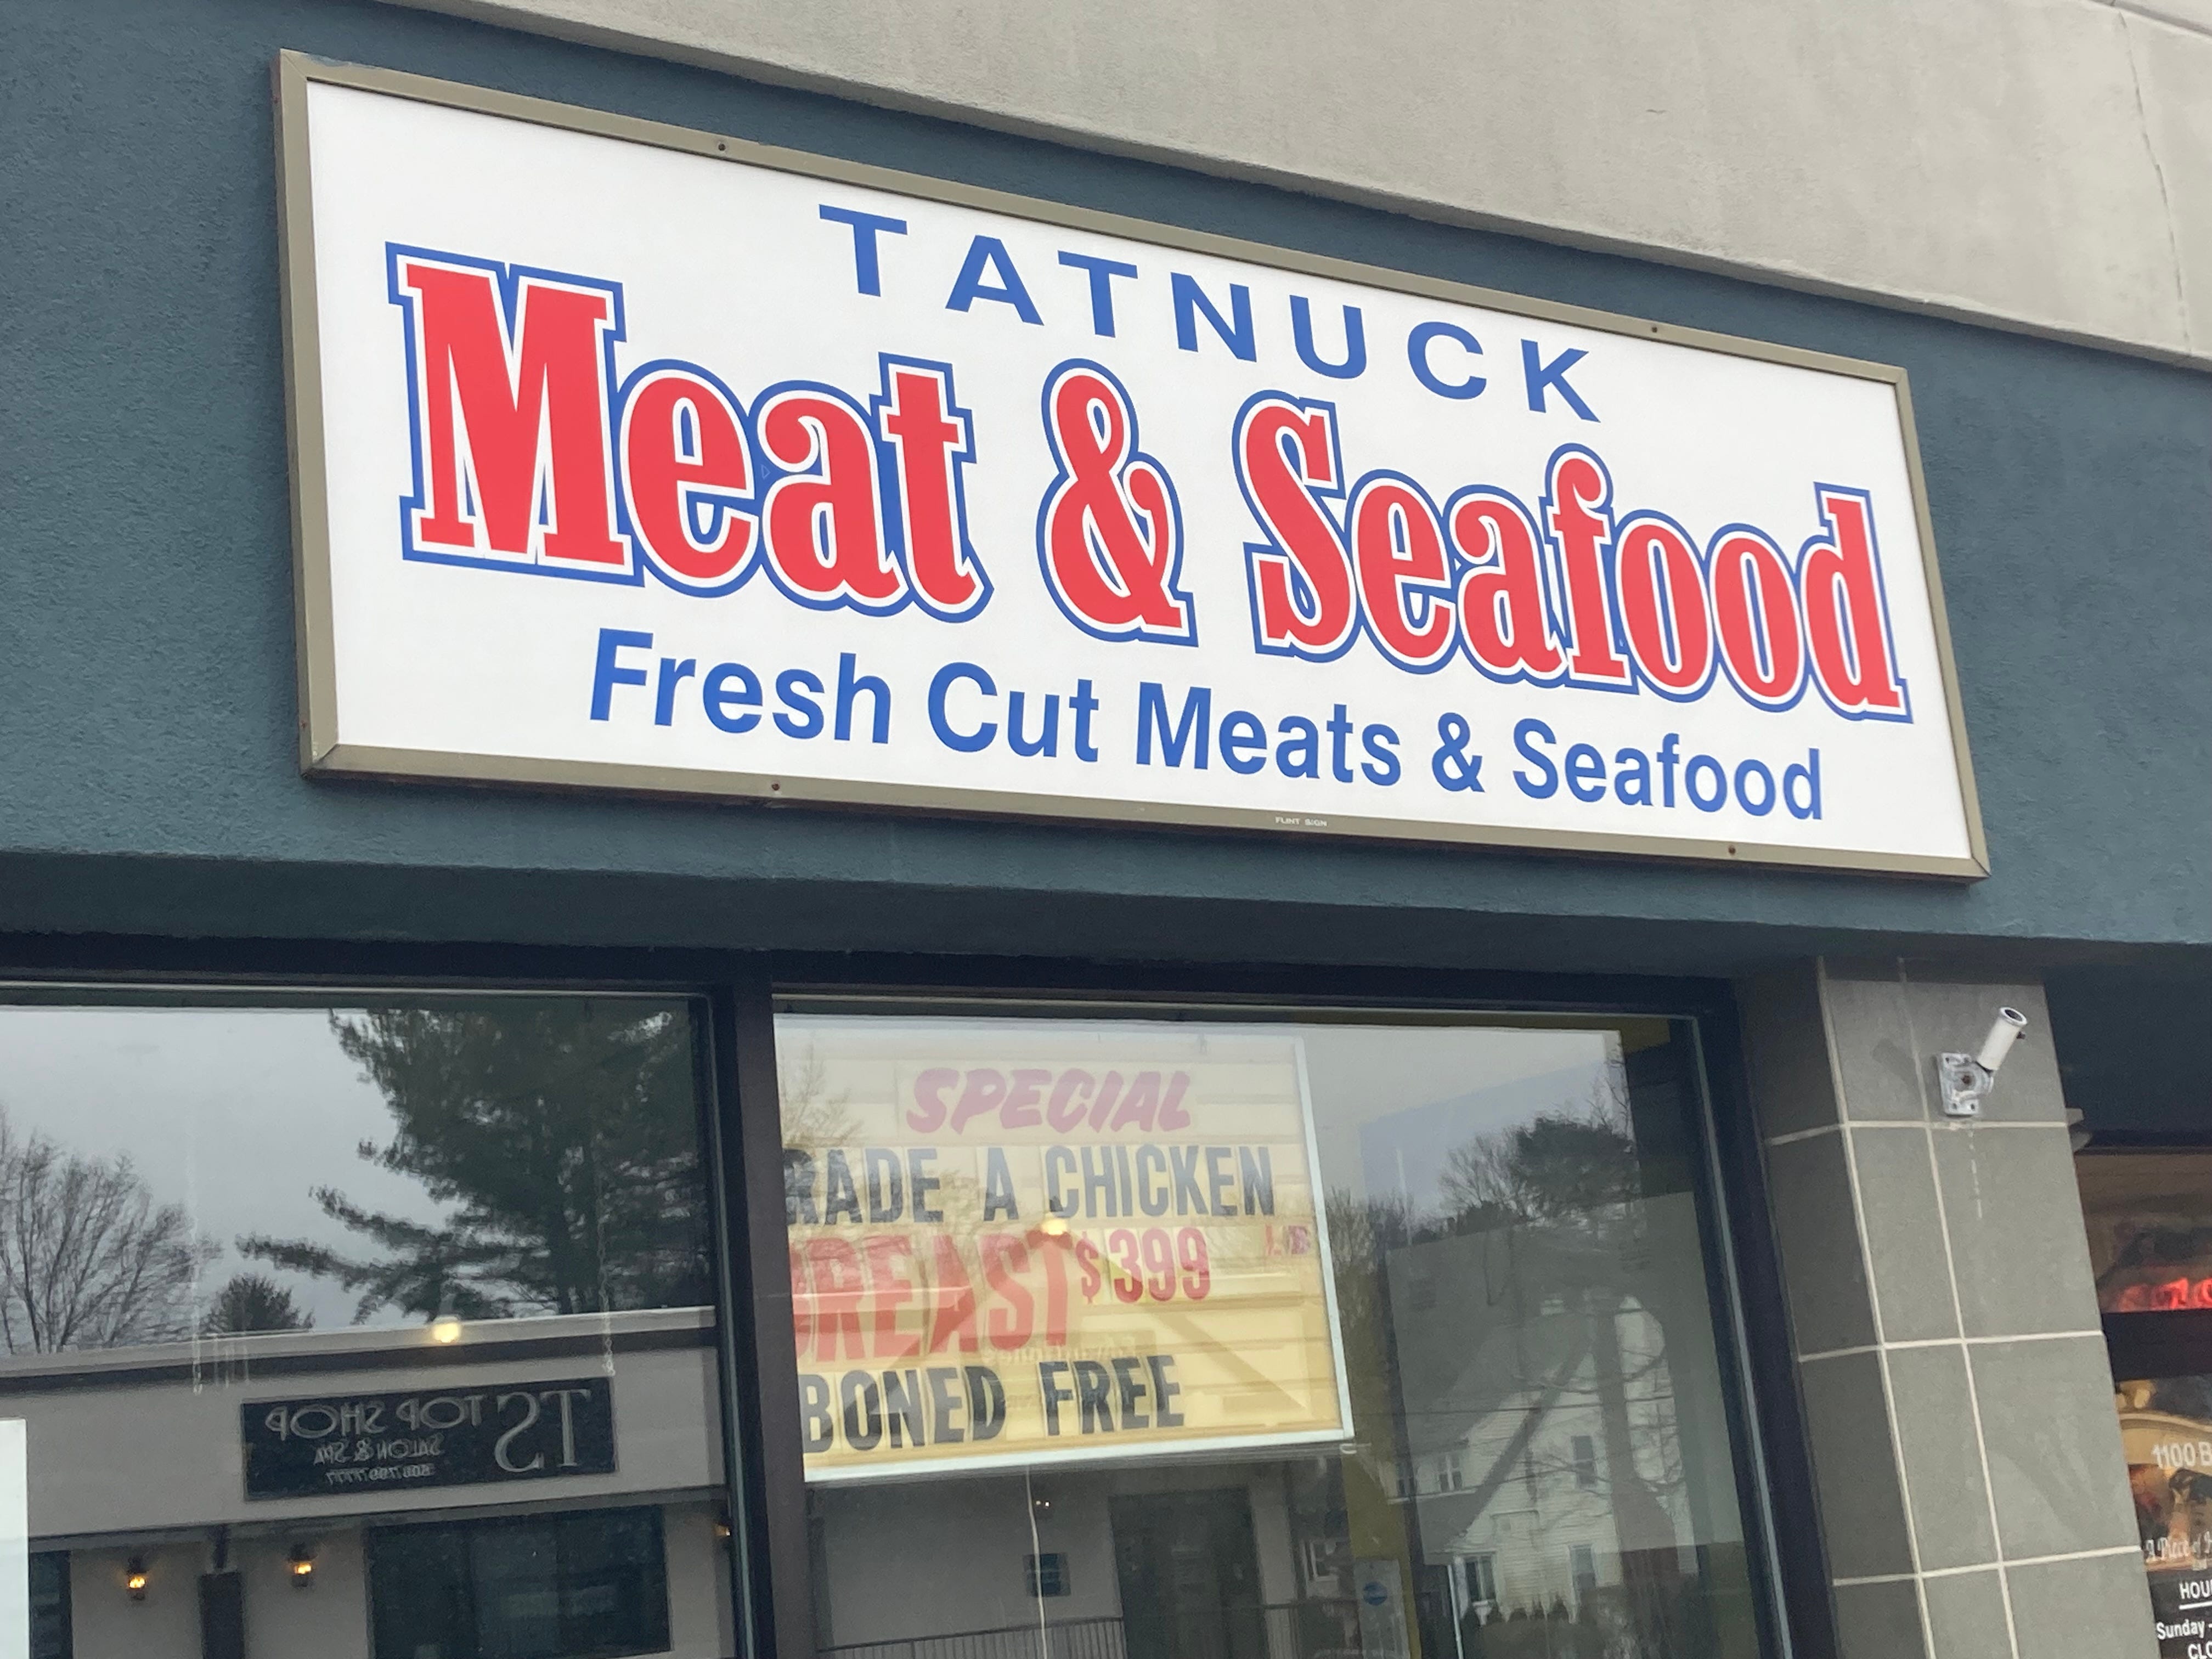 Closing its doors after half a century in Worcester, Tatnuck Meat & Seafood bids farewell